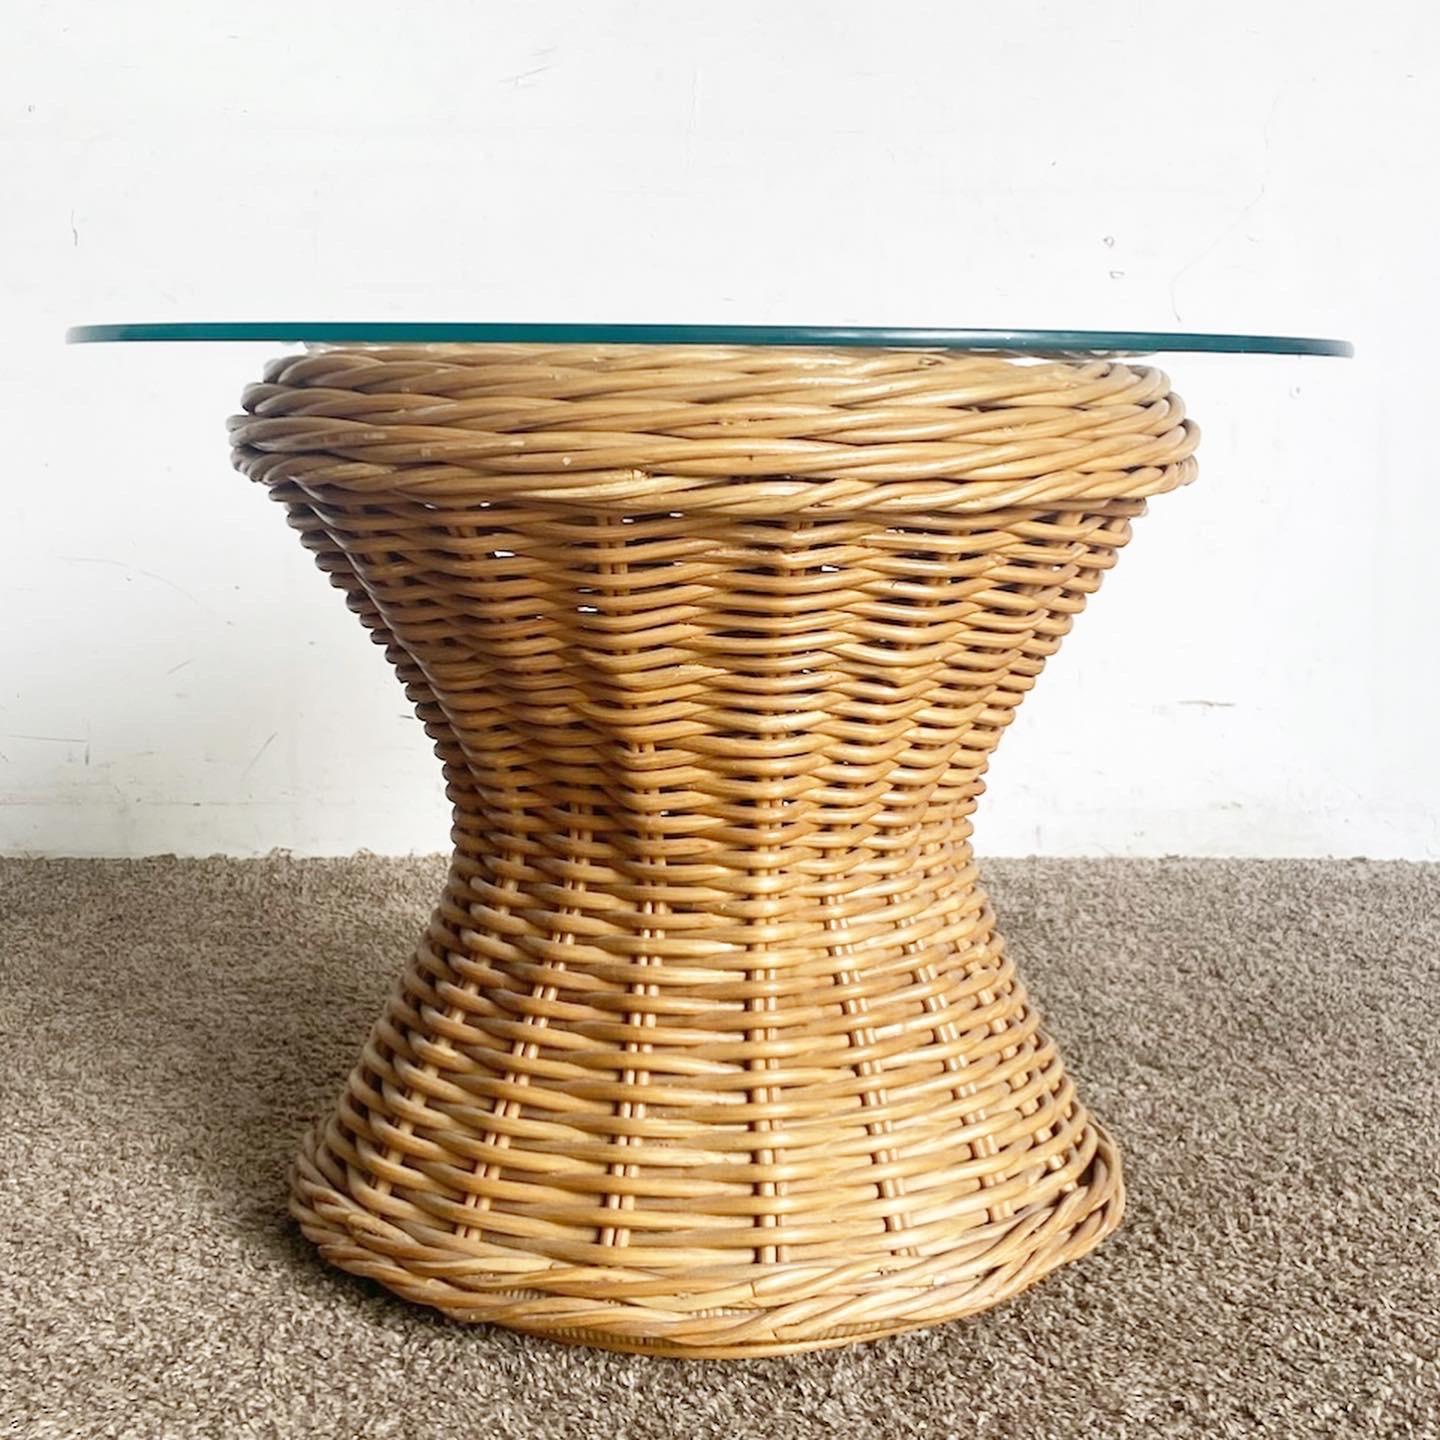 Elevate your living space with this Boho Chic Rattan Glass Top Side Table. Skillfully crafted with a natural rattan base and sleek glass top, this table combines functionality with bohemian elegance.
Some wear around the edges as seen in the photos.